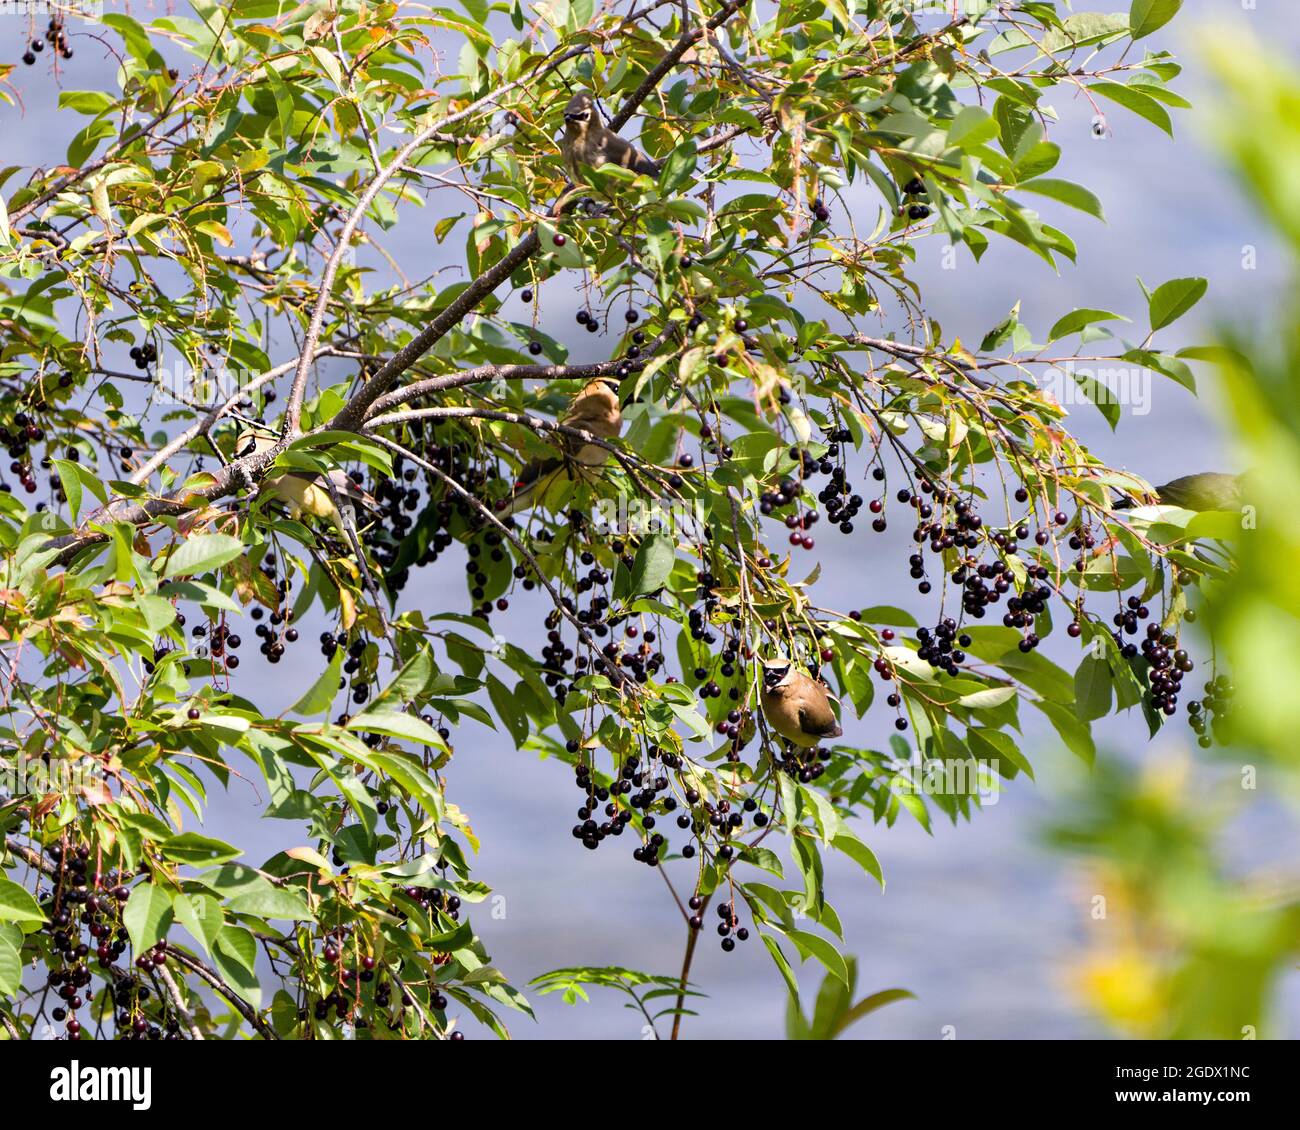 Cedar Waxwing birds perched eating wild berry fruits in their environment and habitat surrounding with a blur blue sky. Stock Photo